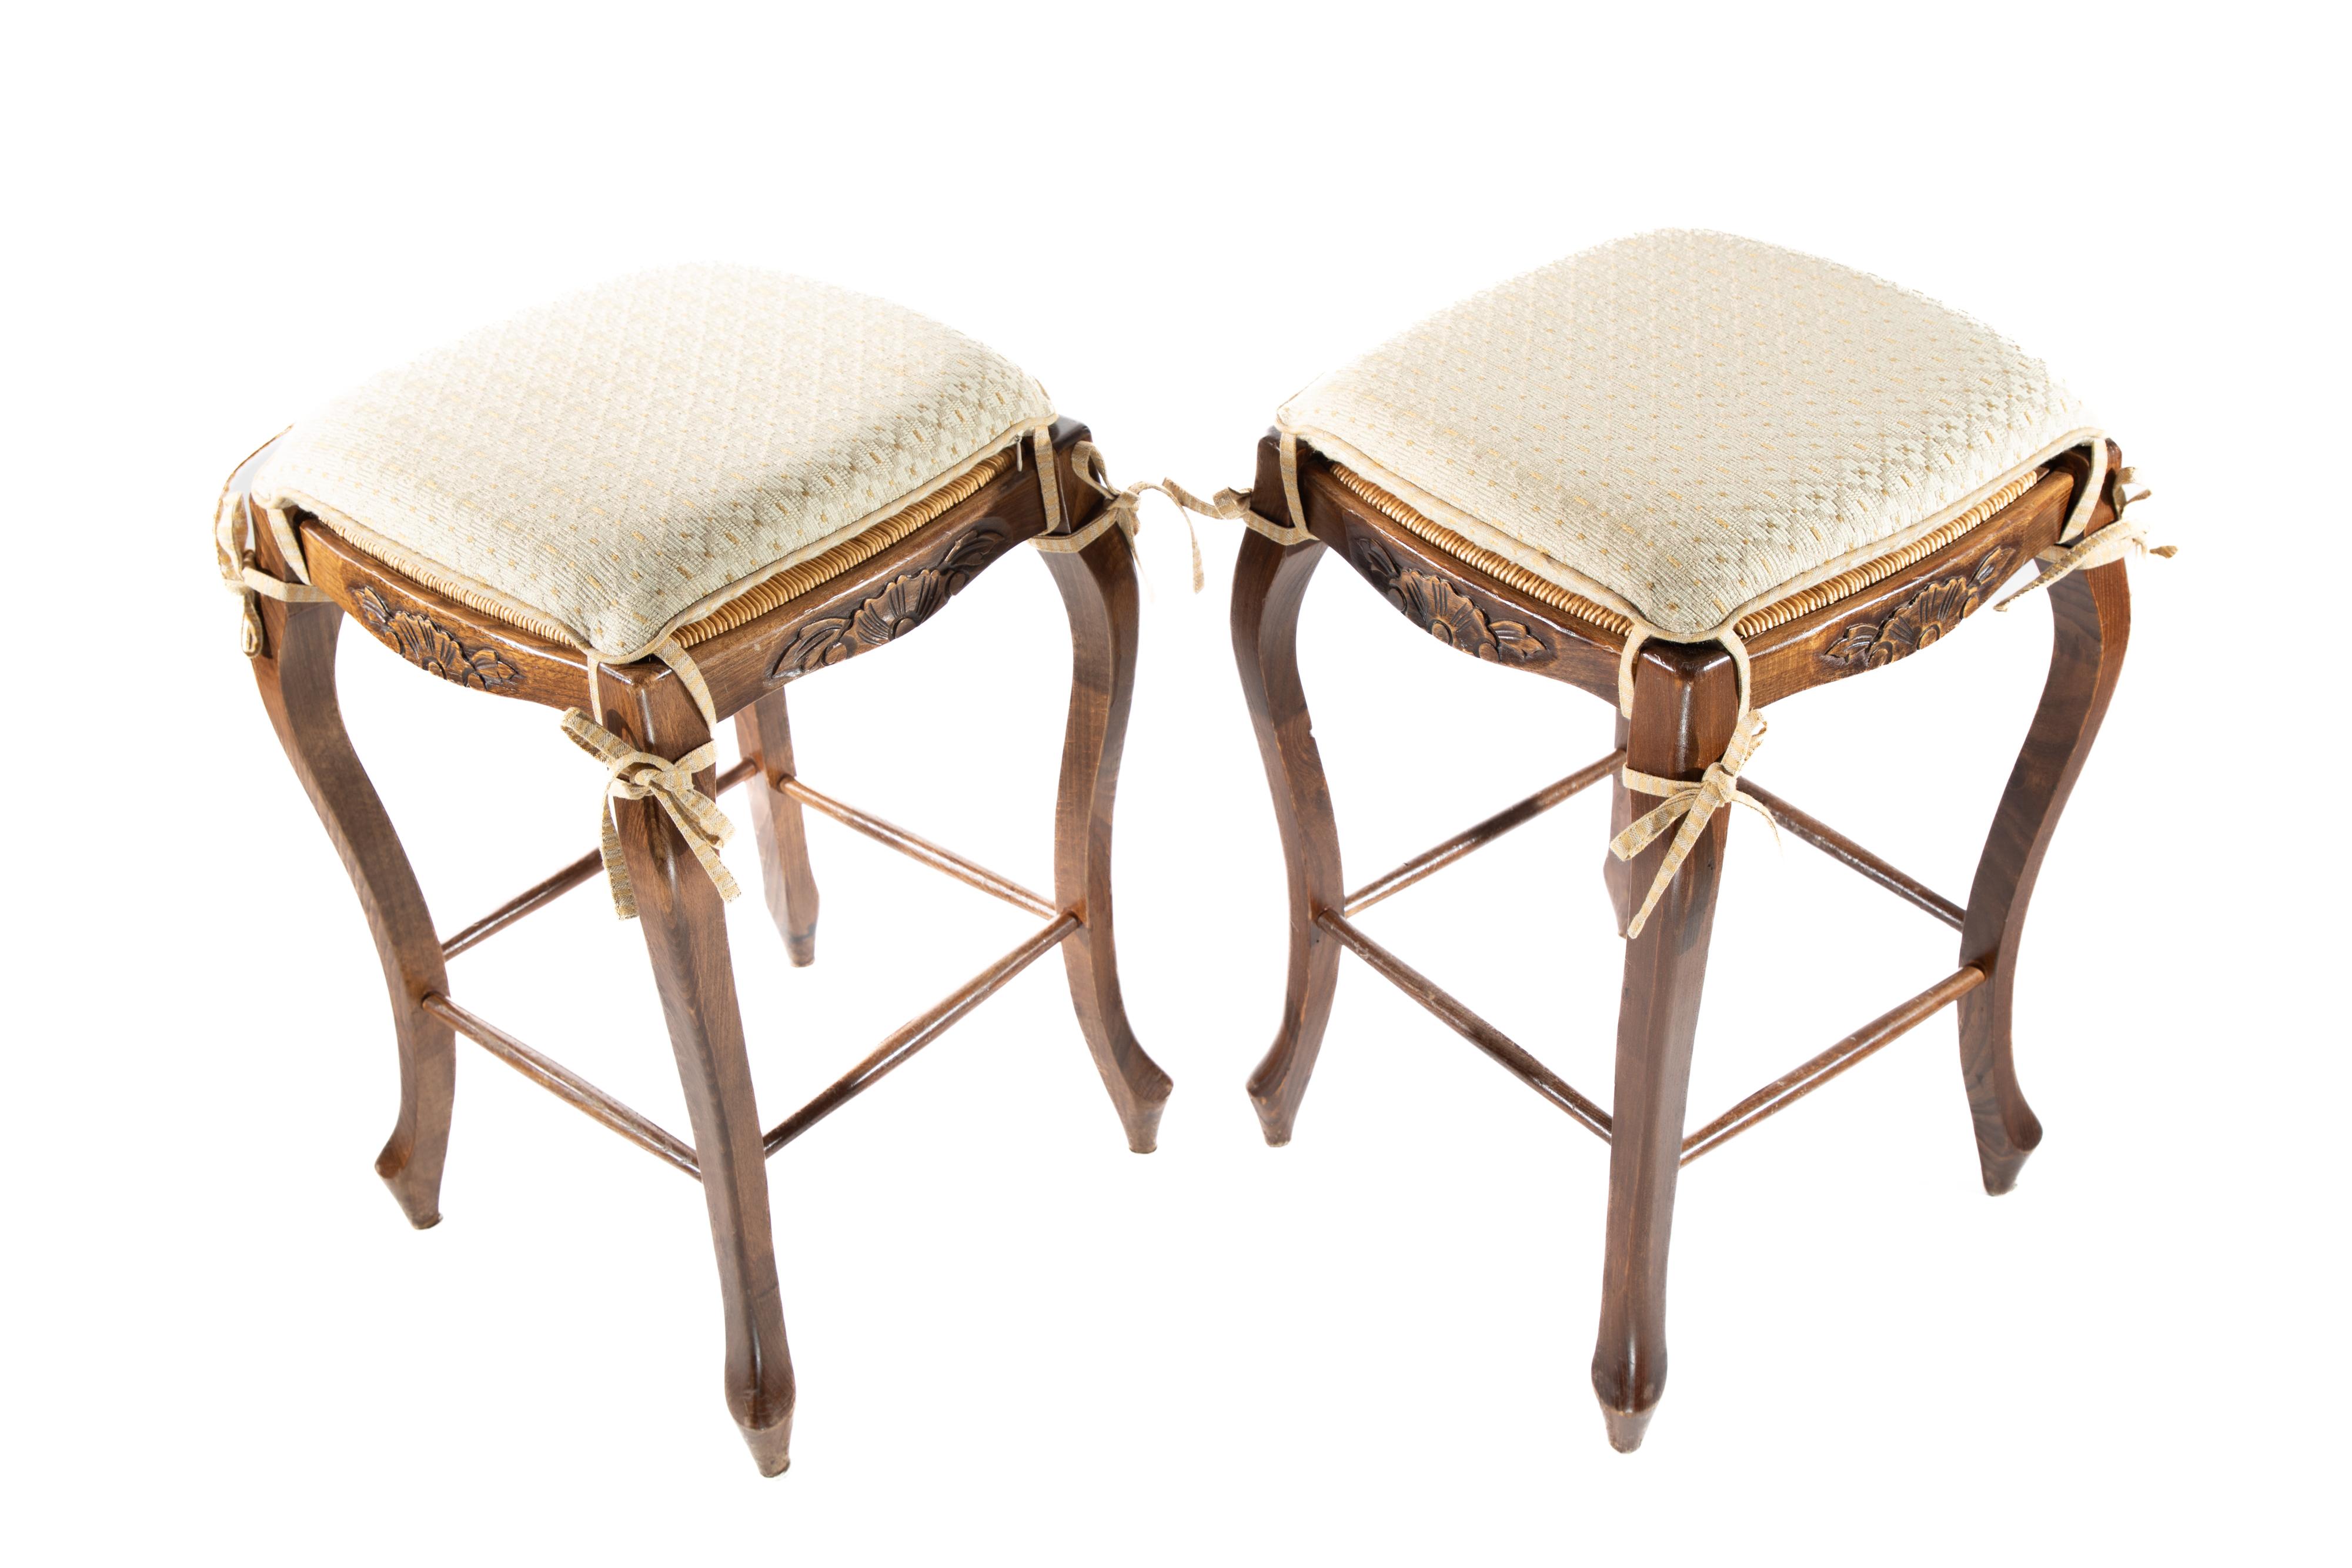 20th Century Pair of Wooden Barstools with Rush Woven Seats and Upholstered Cushions For Sale